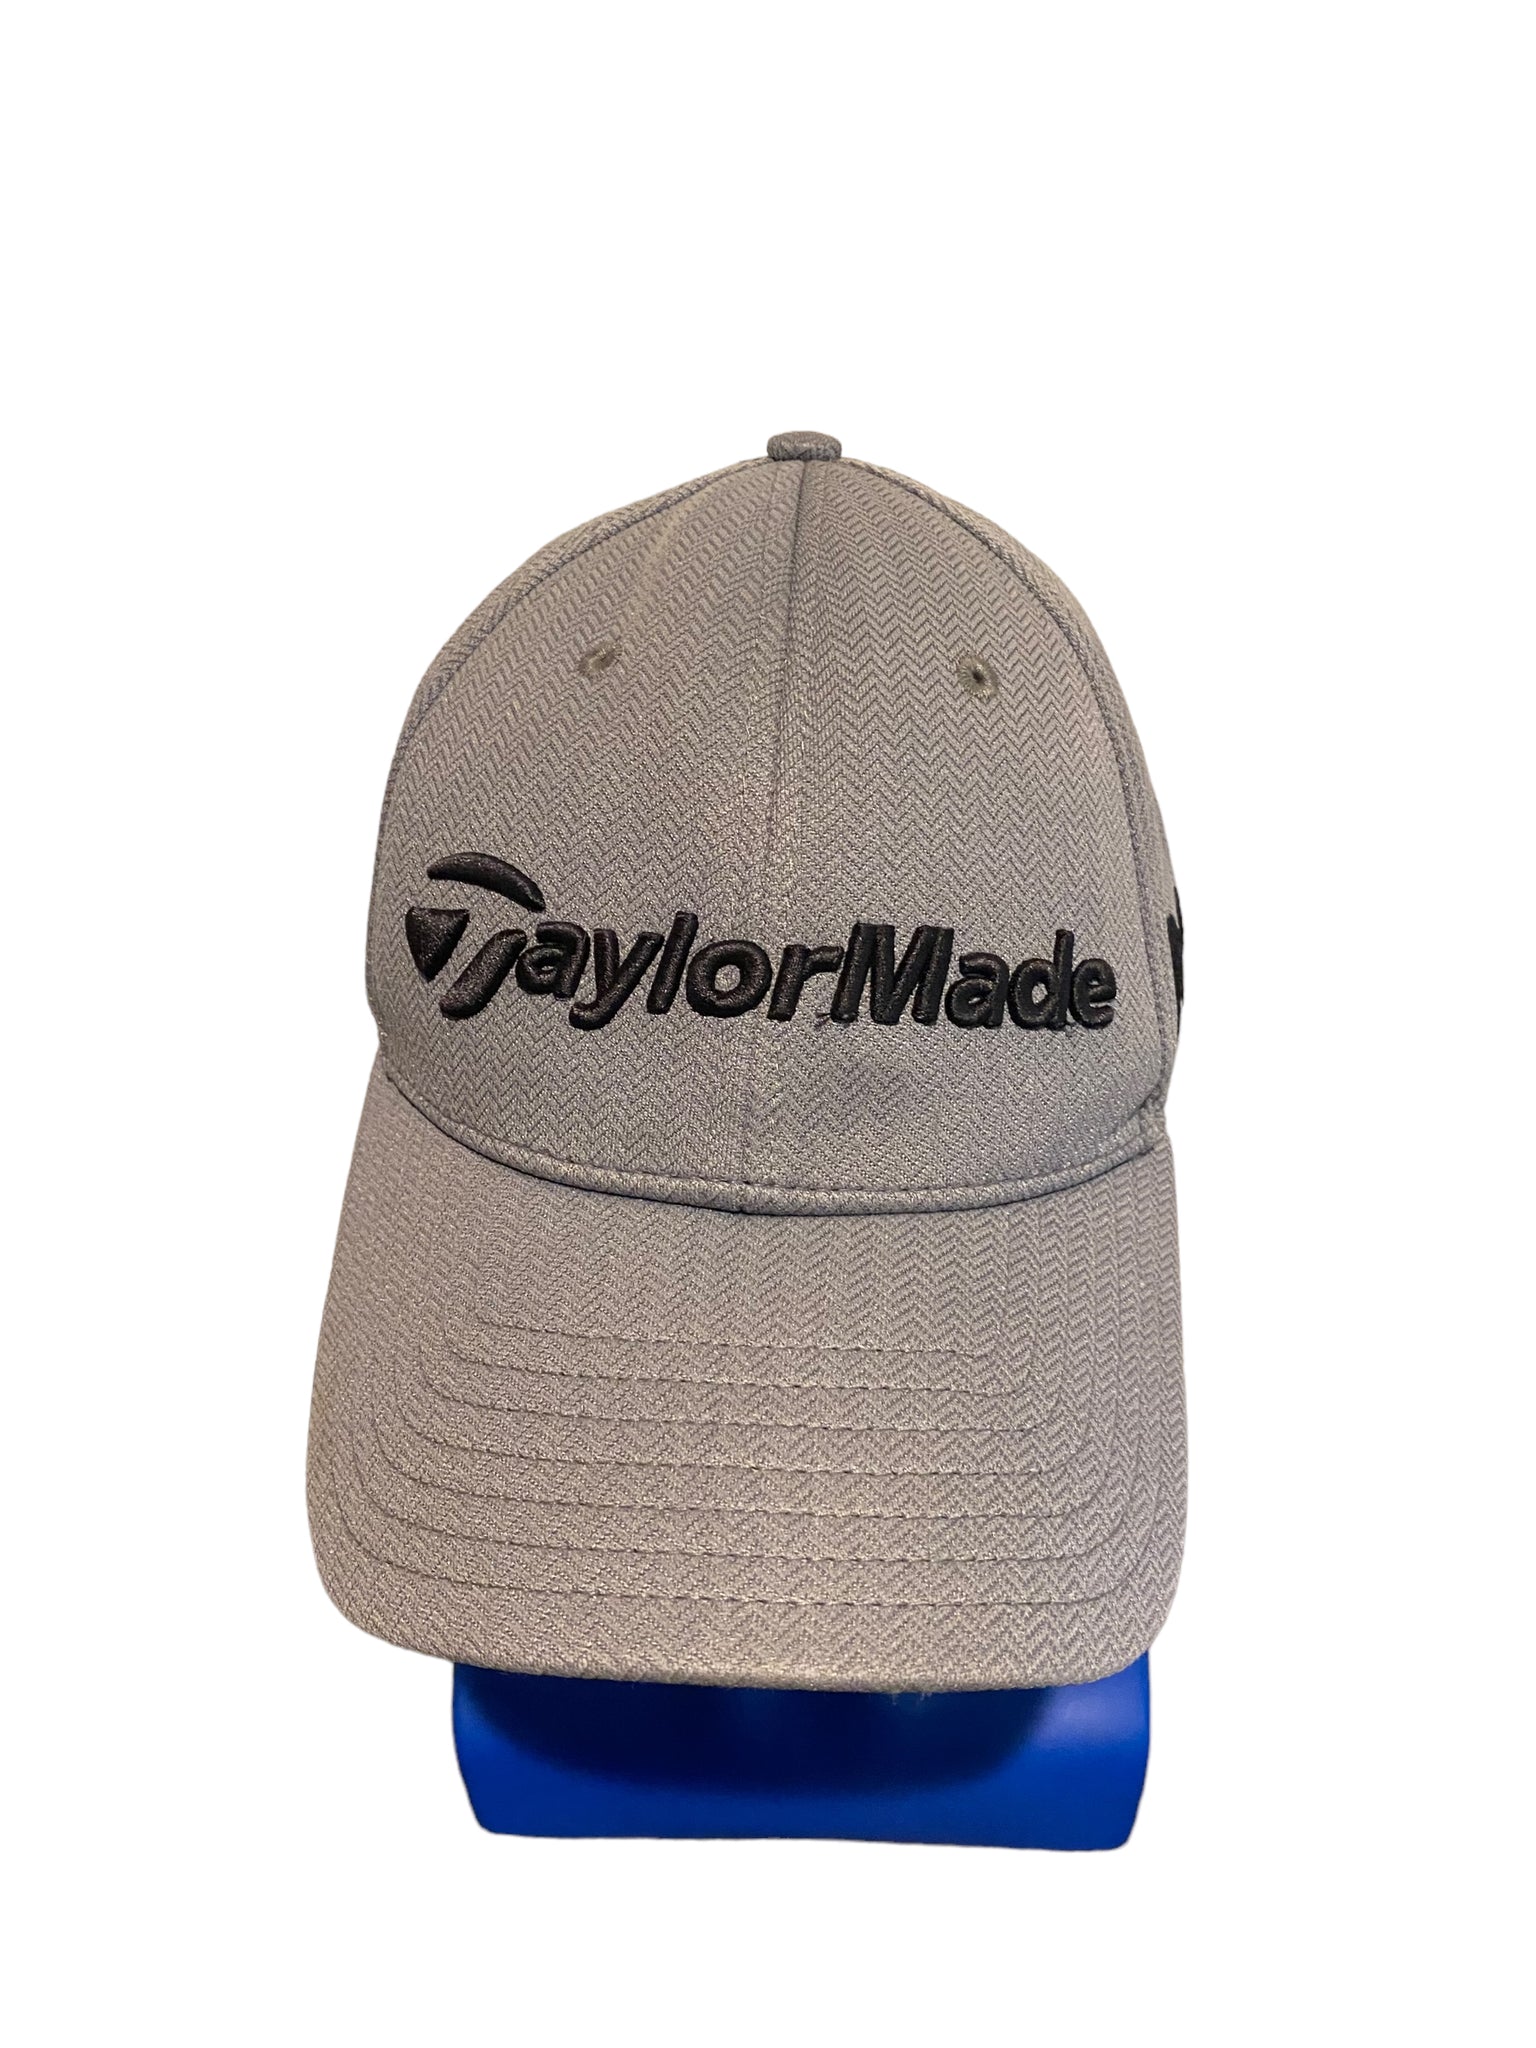 Taylormade PSI M1 Embroidered Golf Adjustable Hat Cap Gray Black